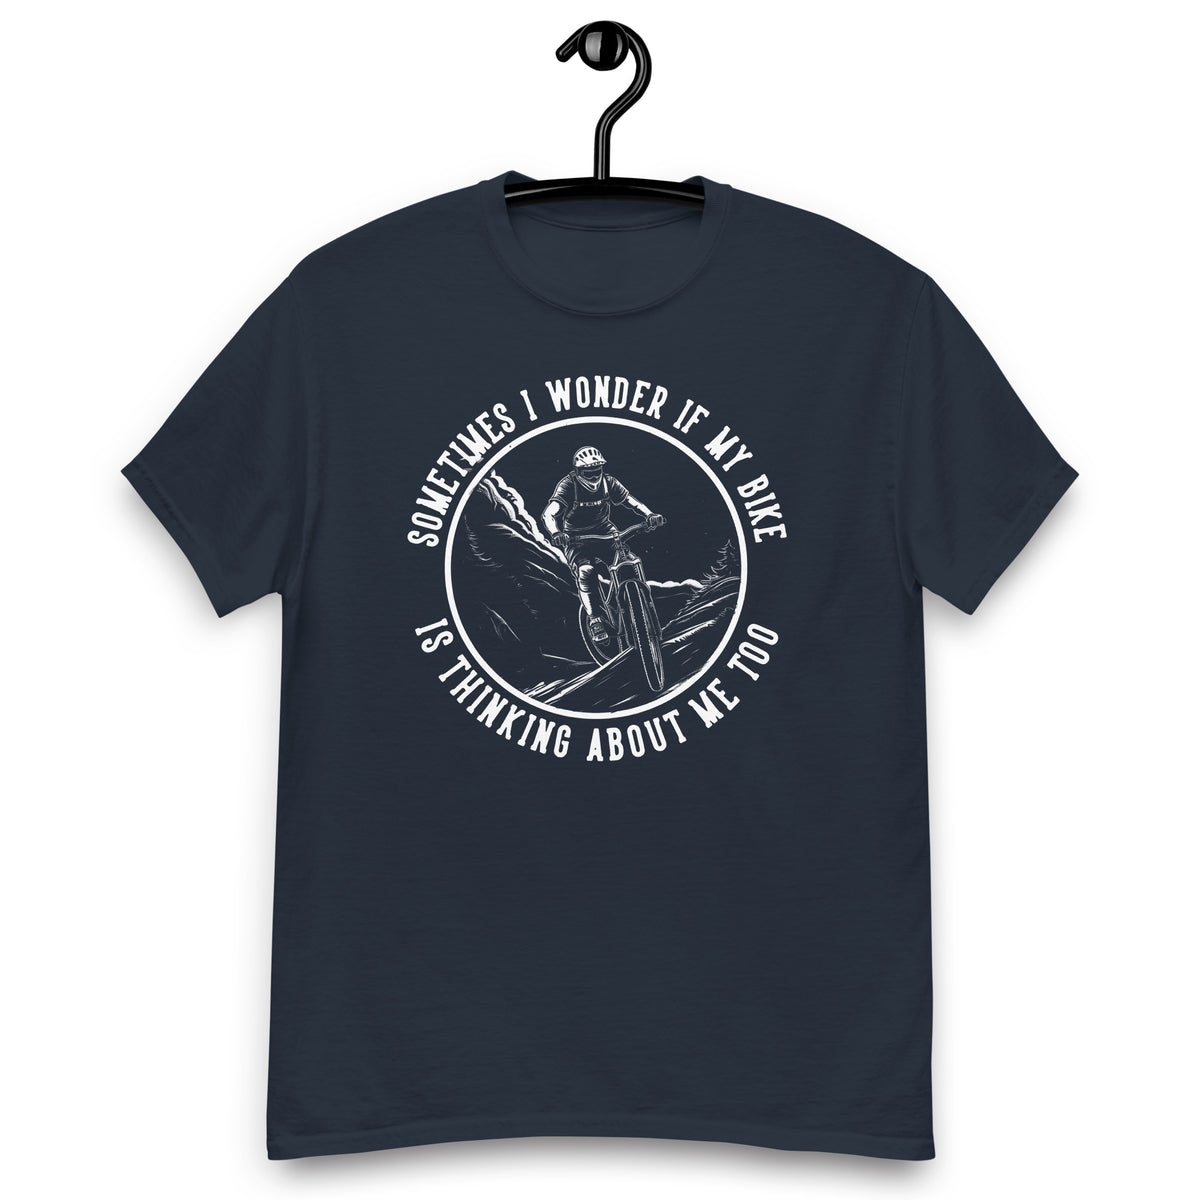 Fahrrad Shirts "Sometimes I Wonder If My Bike Is Thinking About Me Too" Variane 3